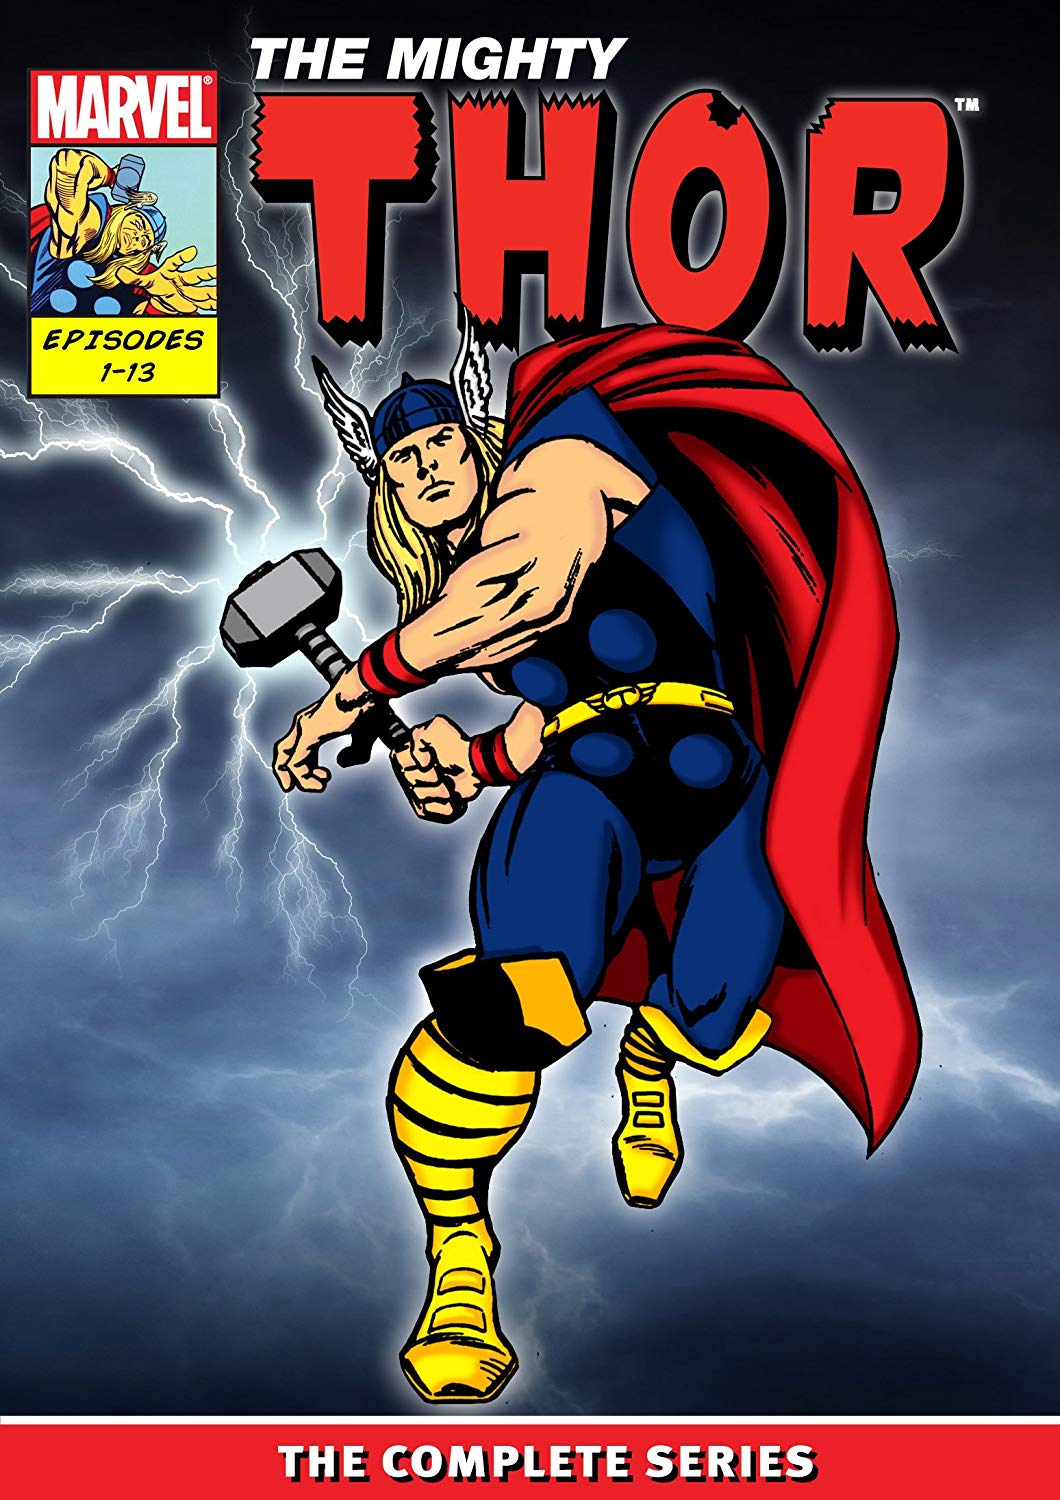 The Mighty Thor - The Complete 1966 Series - DVD